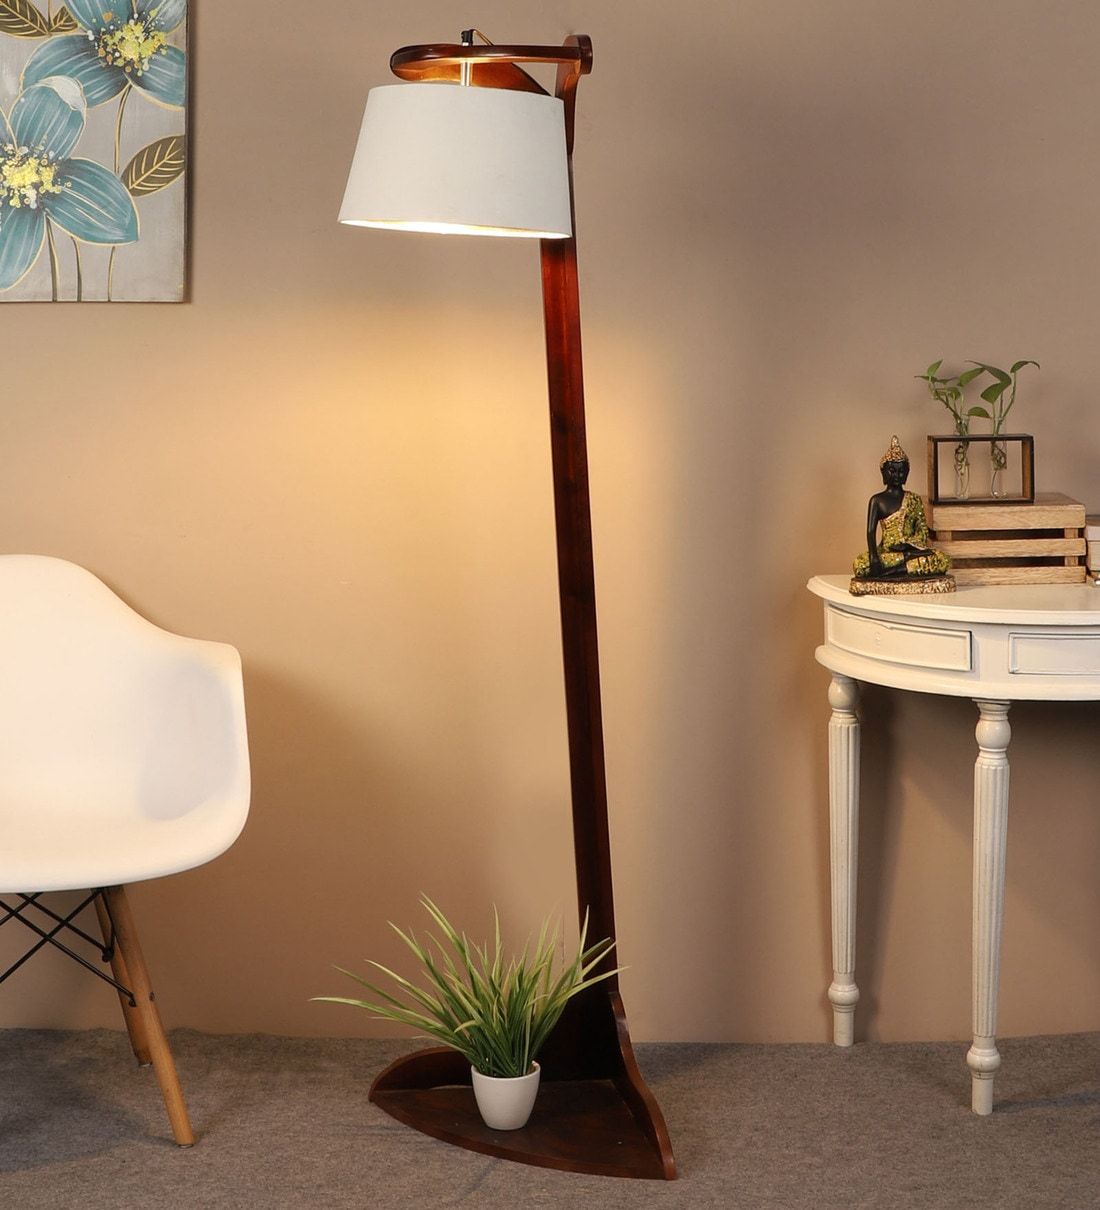 Buy White Shade Floor Lamp With Mango Wood Basethe Lighting Hub Online  – Club Floor Lamps – Floor Lamps – Lamps And Lighting – Pepperfry Product Intended For Mango Wood Floor Lamps (Photo 11 of 15)